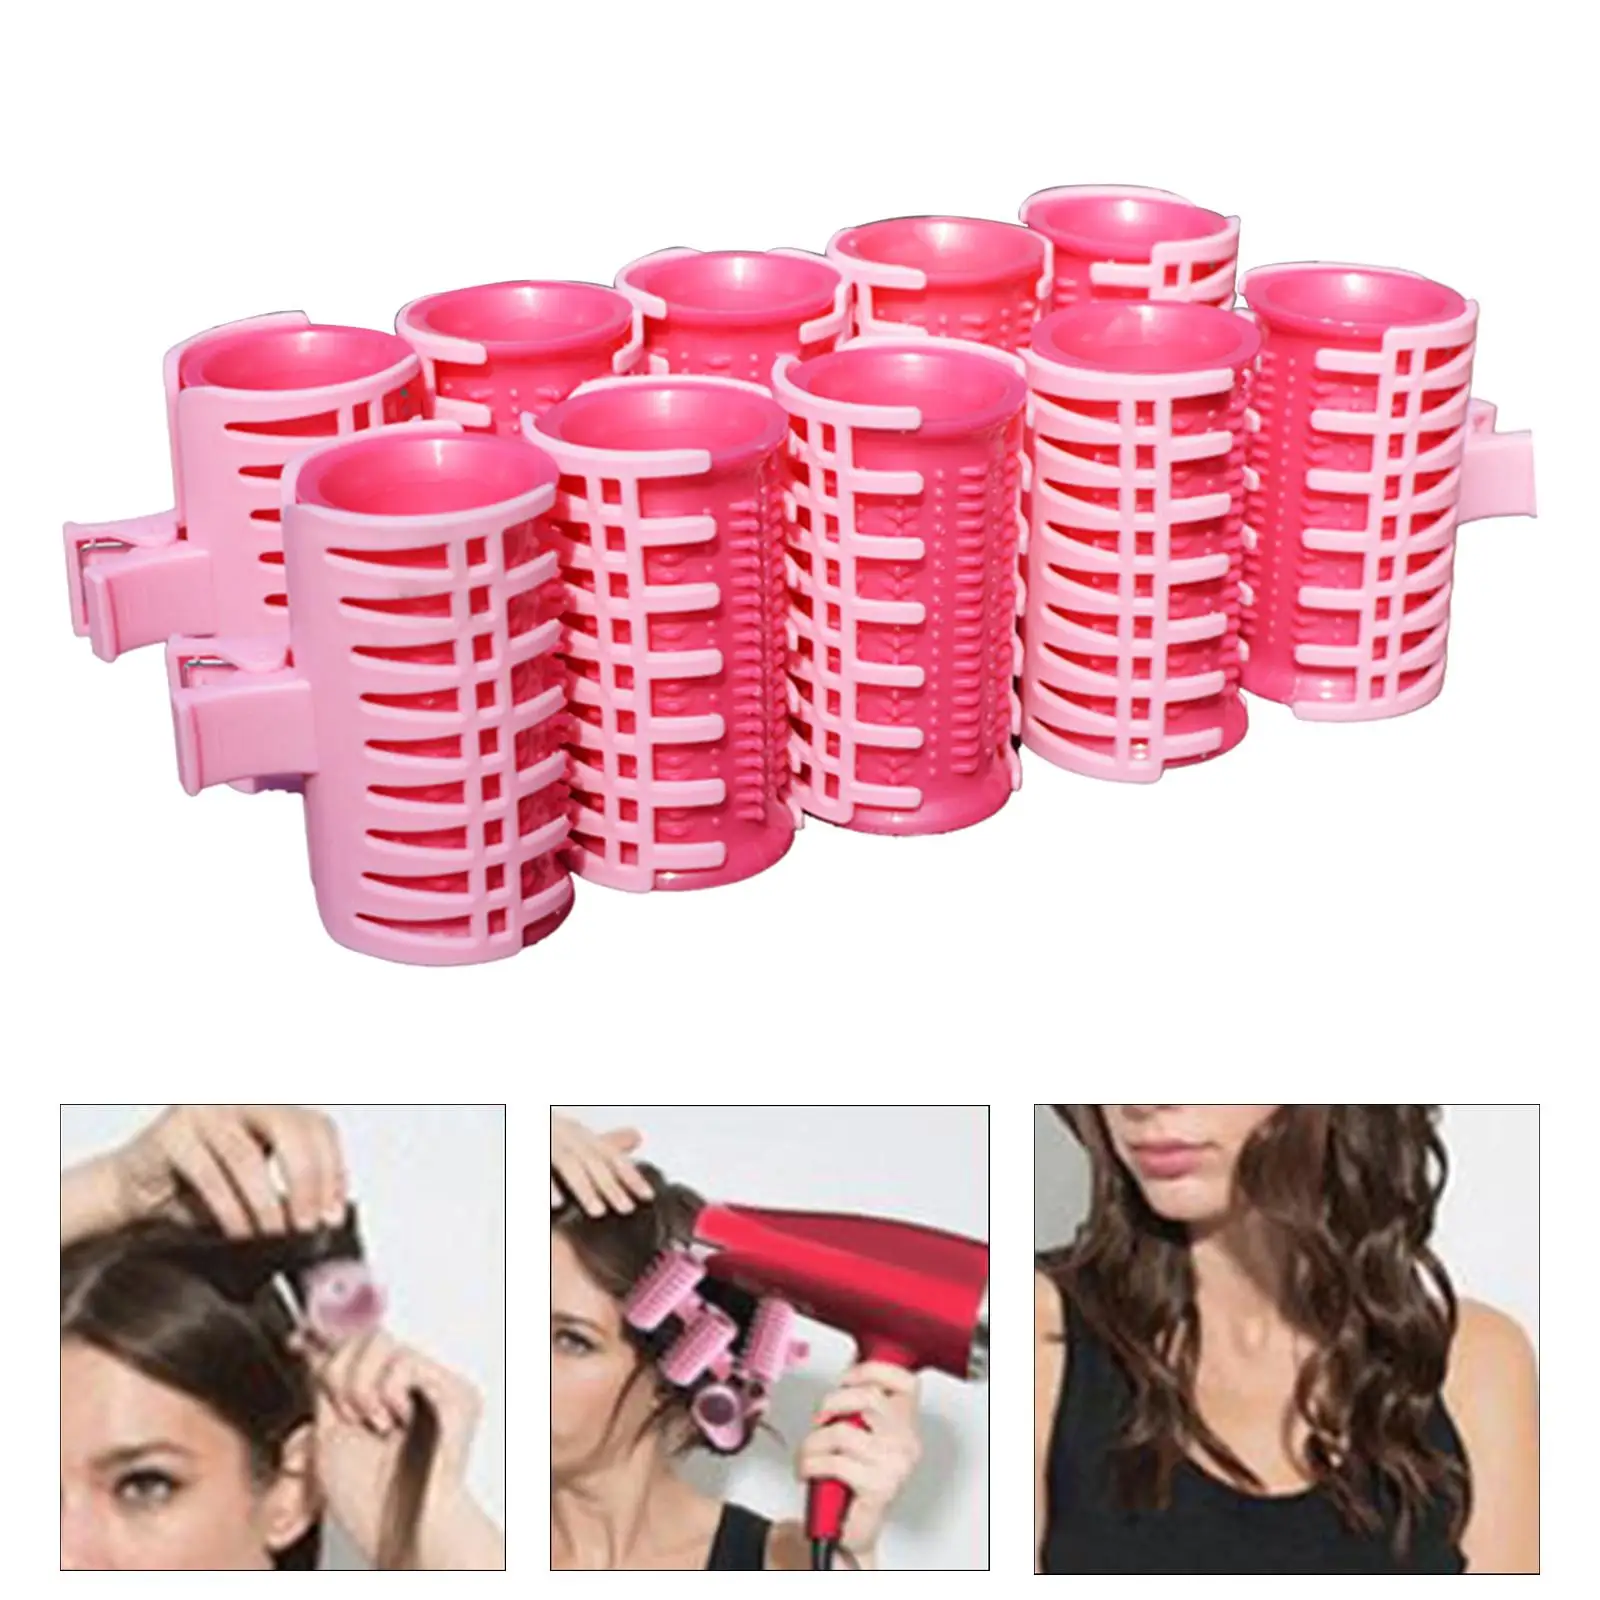 Roller Curlers Air  Folding Self  Barrettes Candy Color Beauty grip by self Set for Household DIY Girl  Women